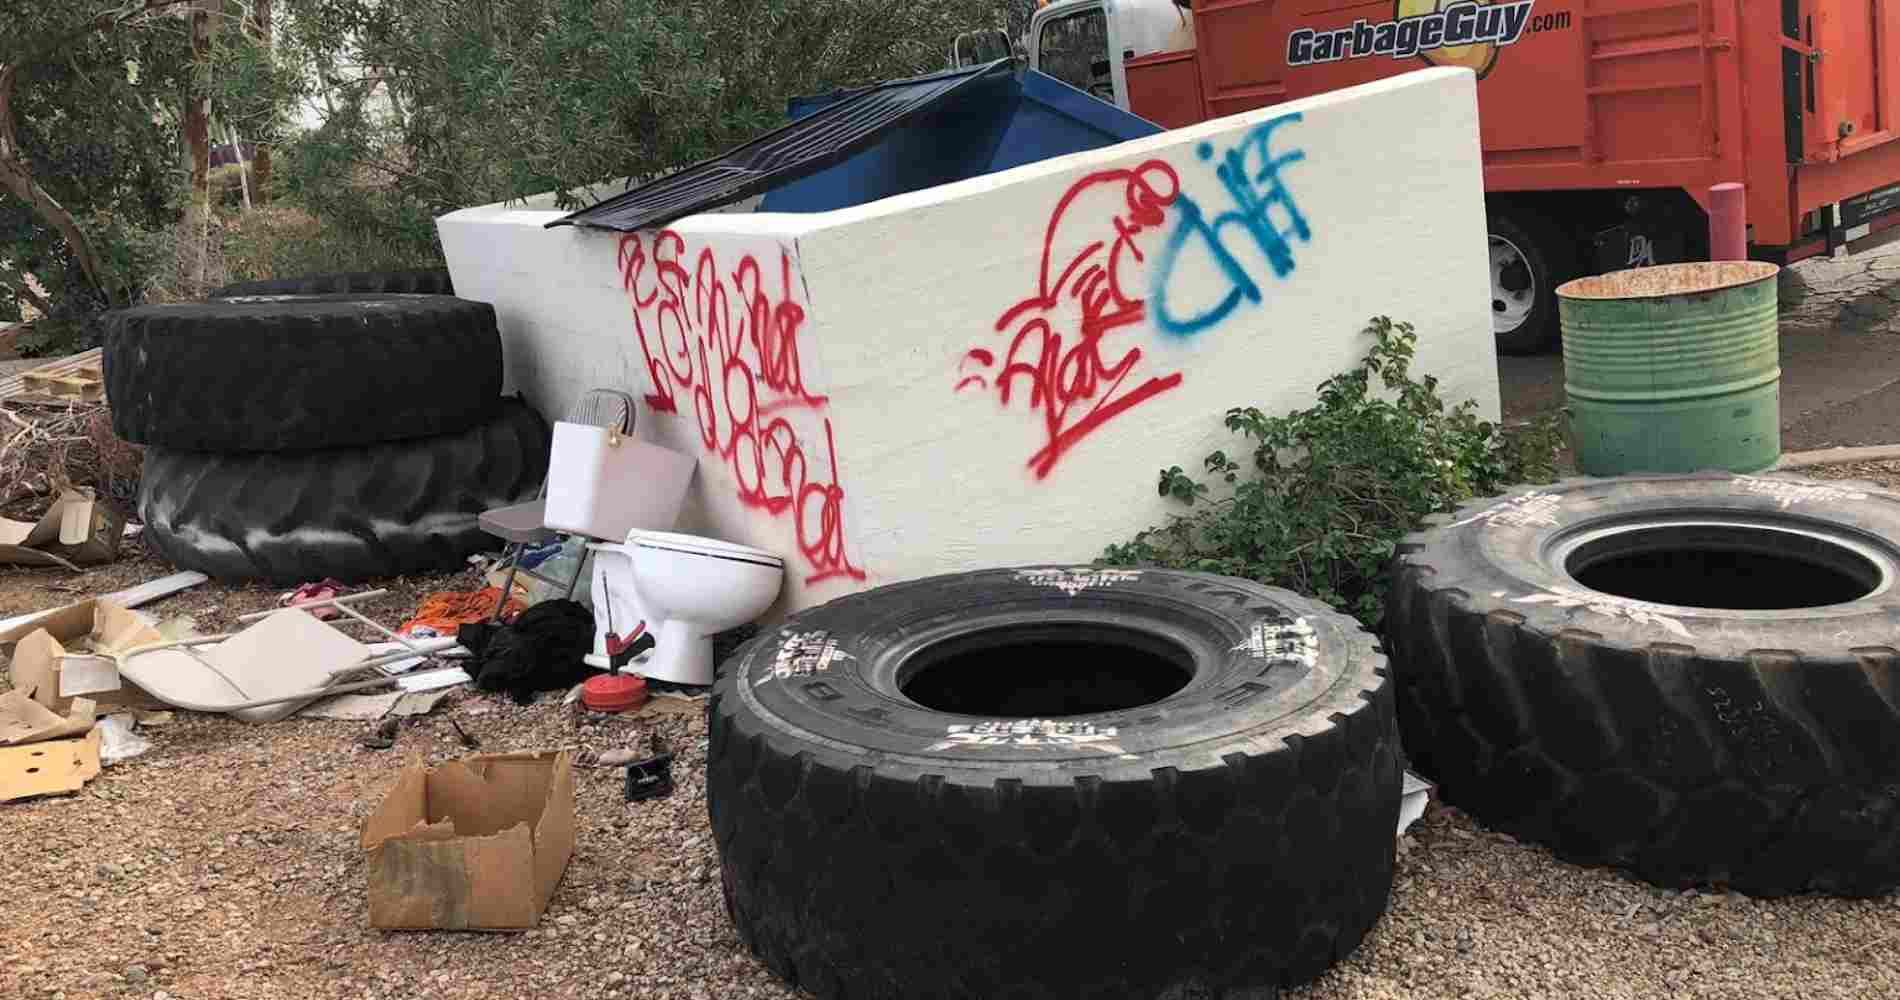 #1 for Tire Disposal in Sun City West, AZ with Over 1200 5-Star Reviews!